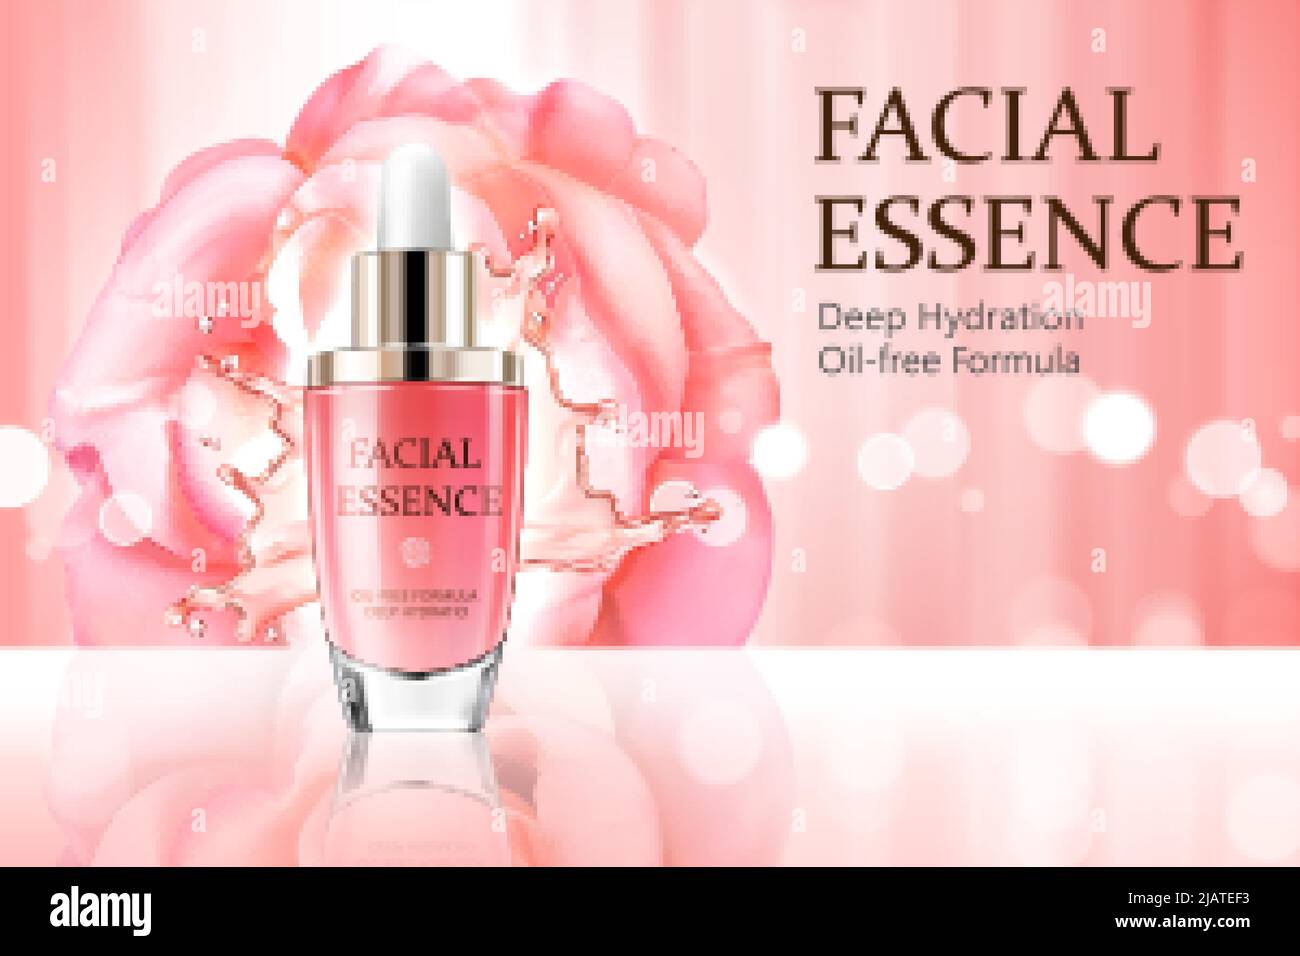 Facial essence banner ad. 3D dropper bottle displayed on a glass surface with liquid splash, big pink rose and light flares in the back Stock Vector